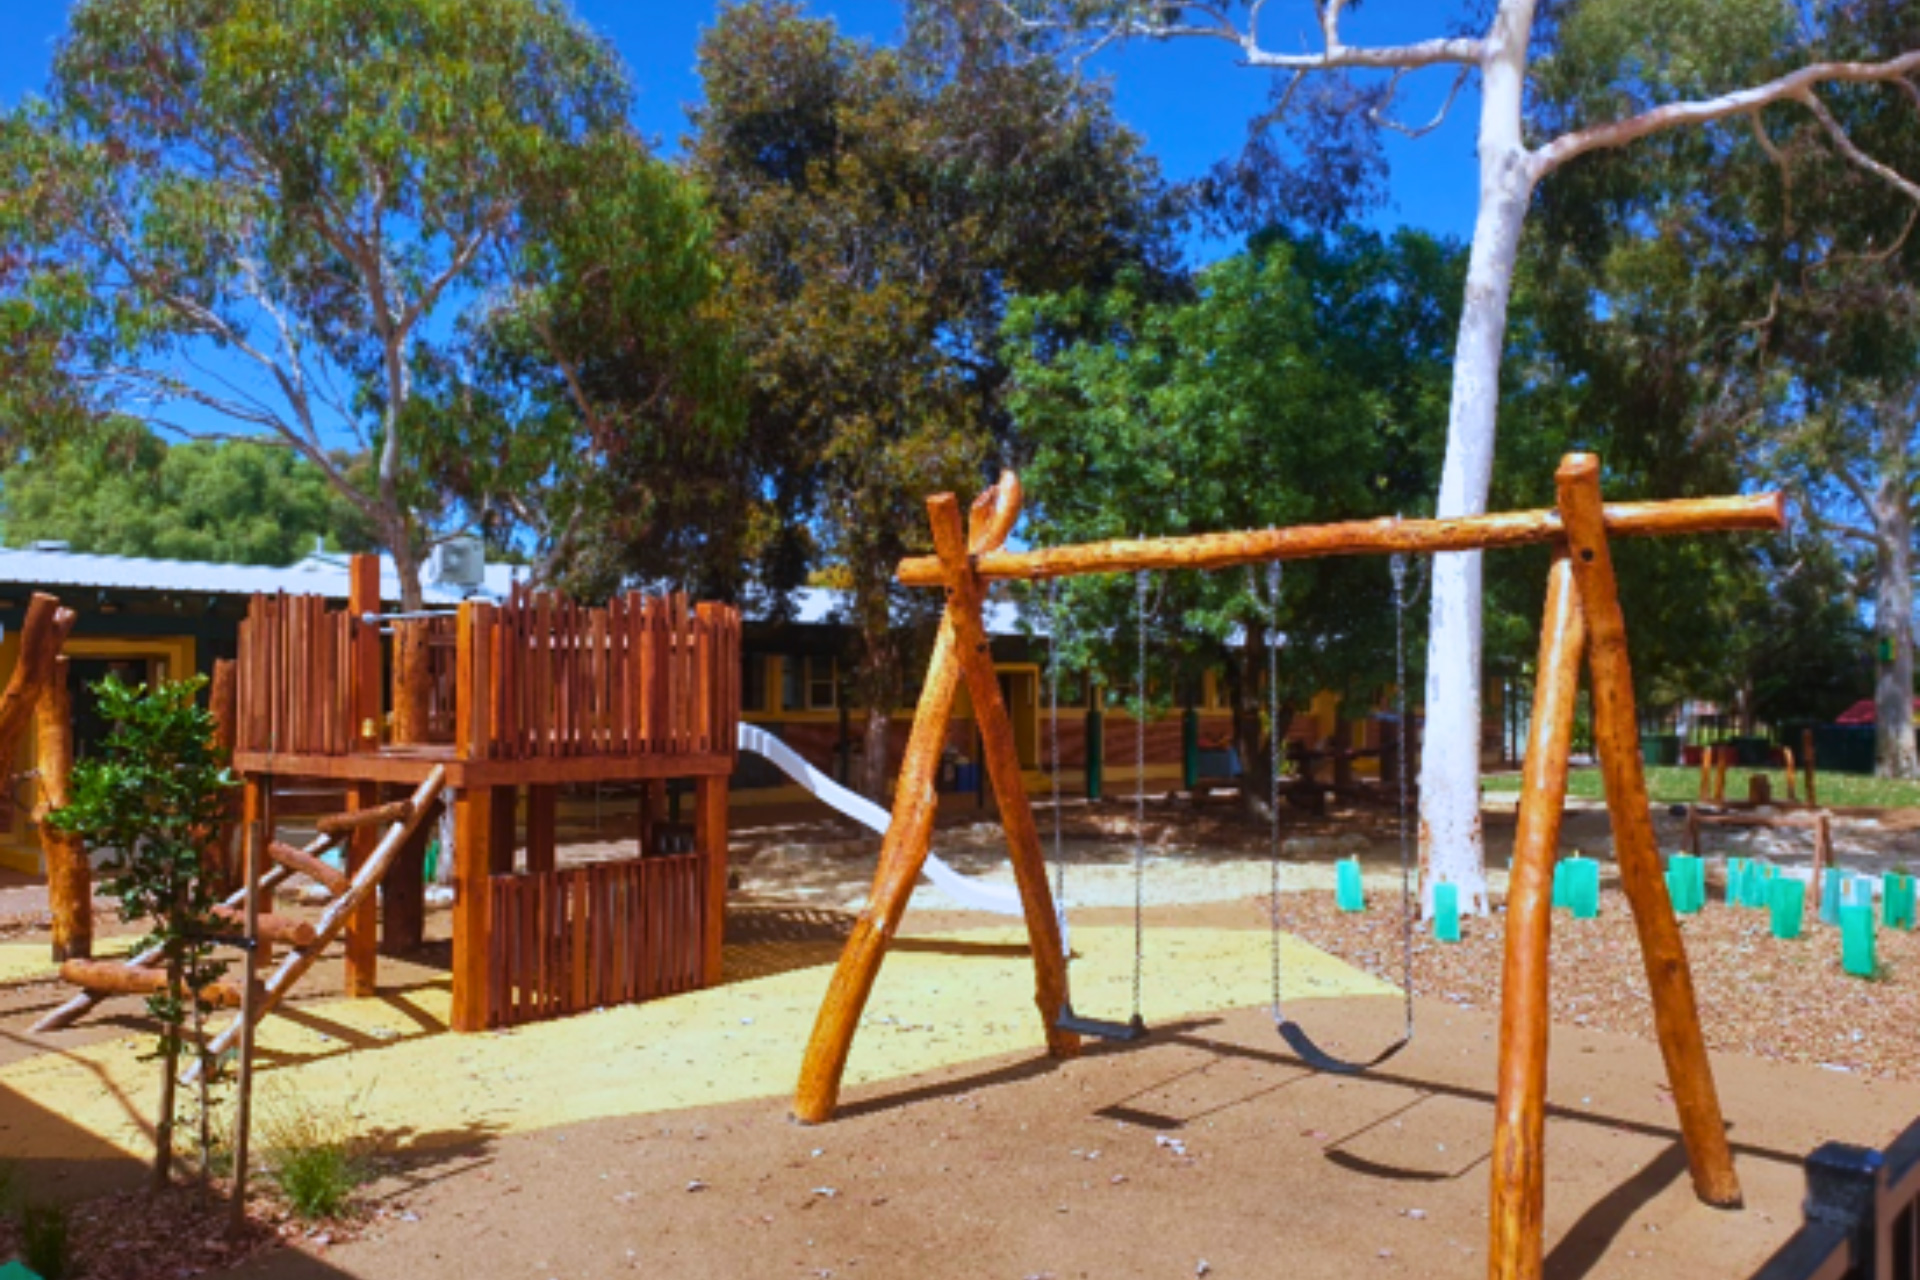 PLAY-AREA-FOR-KIDS